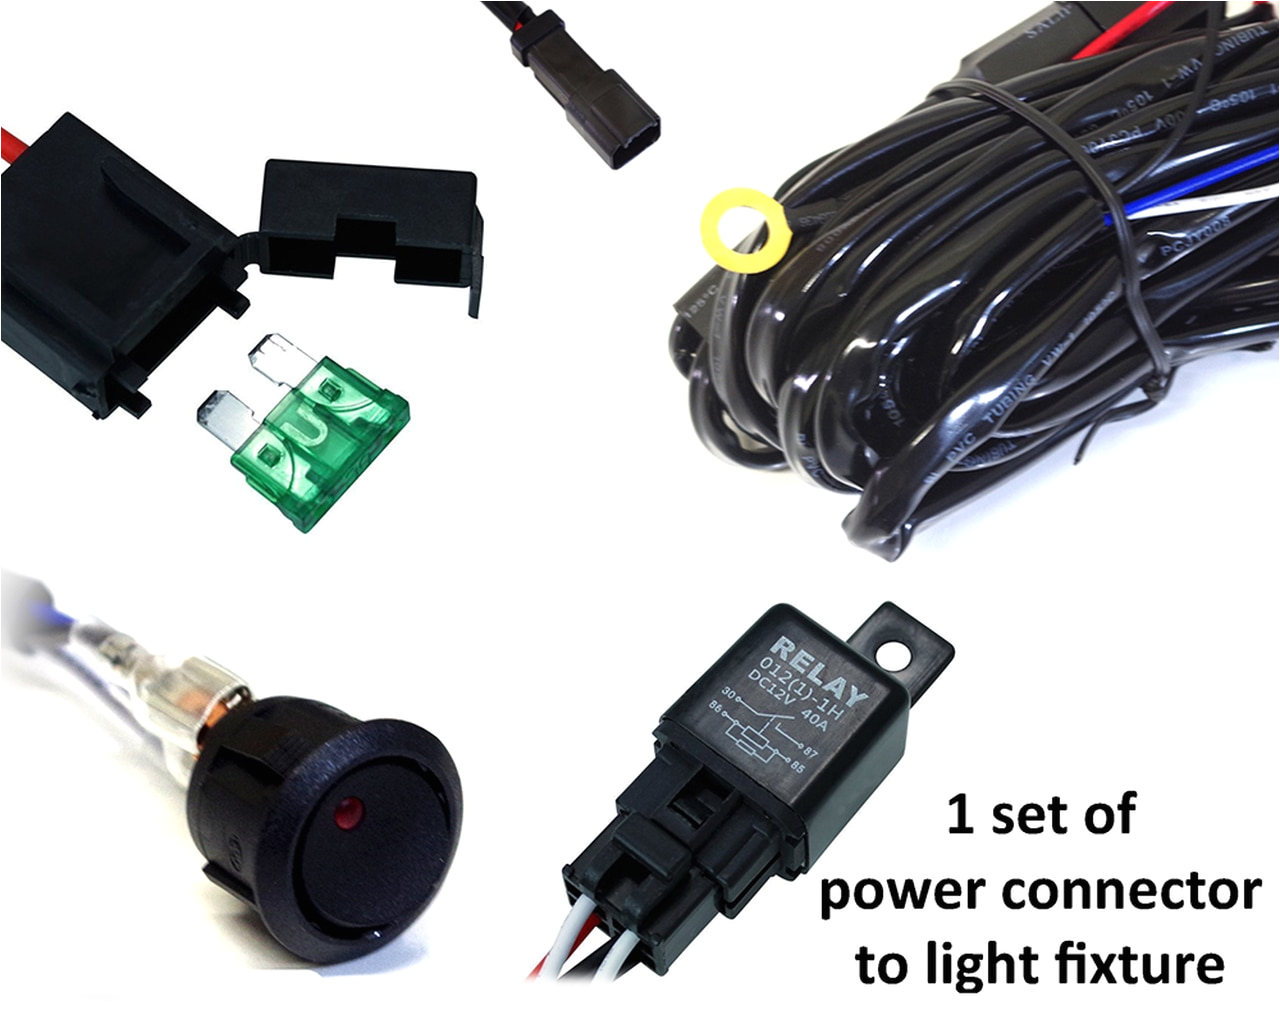 Led Equipped Light Bar Wiring Diagram Xprite Led Light Bar Wiring Harness with 1 Leg 40 Amp Relay On Off Switch